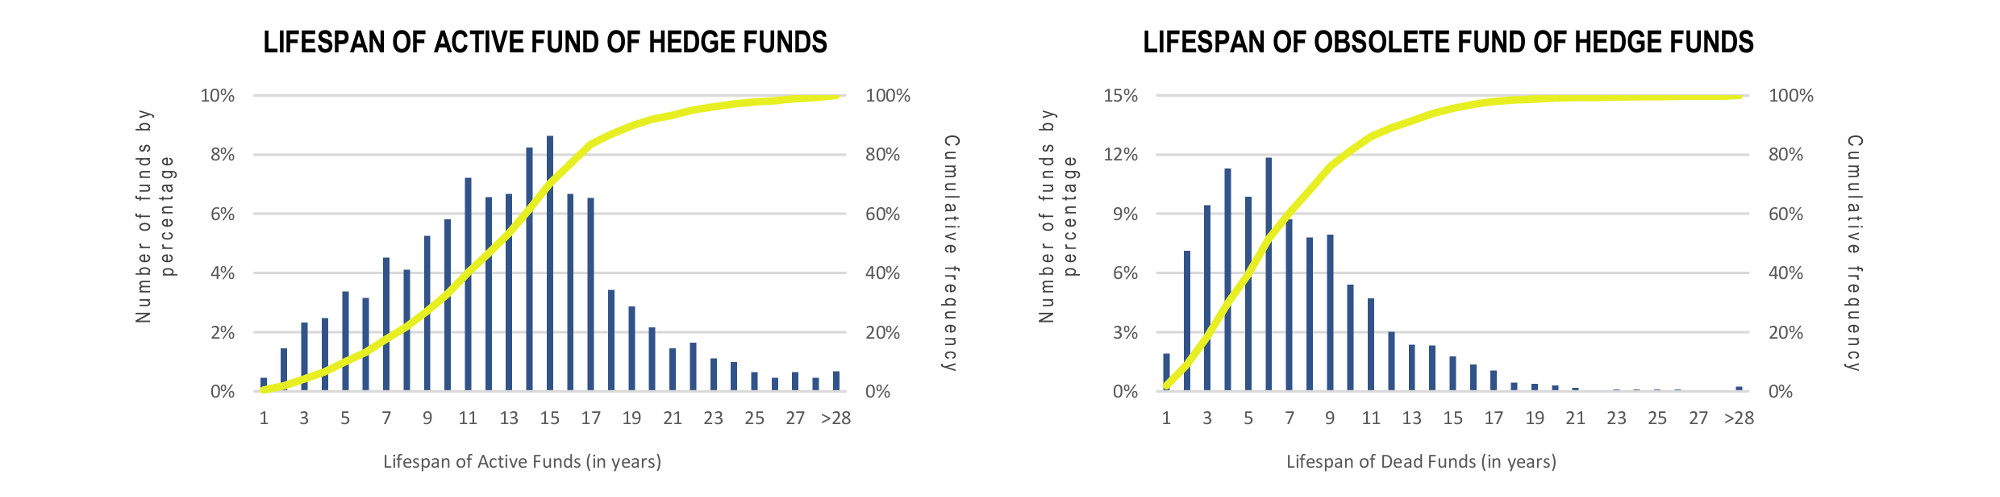 Global Funds of Hedge Funds Infographic June 2018 - lifespan of active and obsolete fund of hedge funds